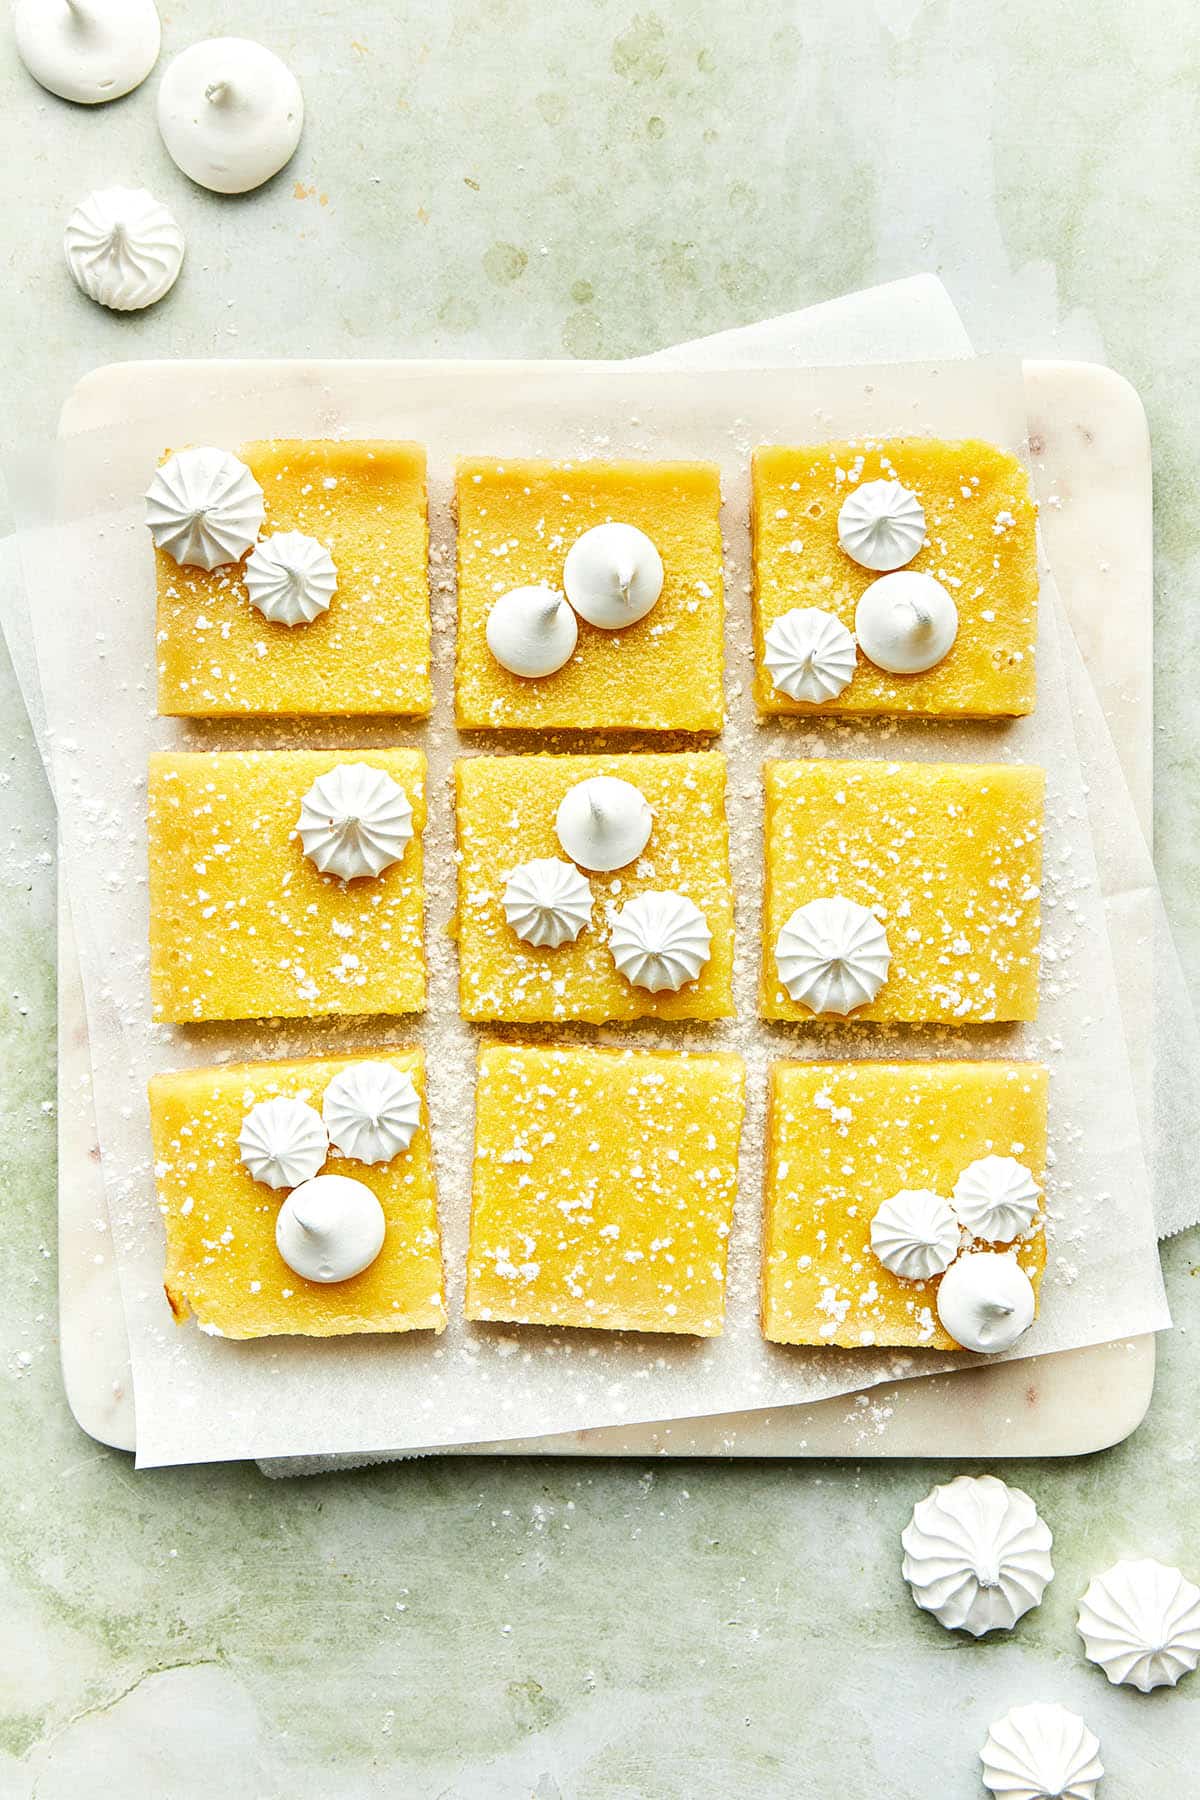 Nine sliced lemon squares on a marble board sprinkled with powdered sugar and topped with mini piped meringues.